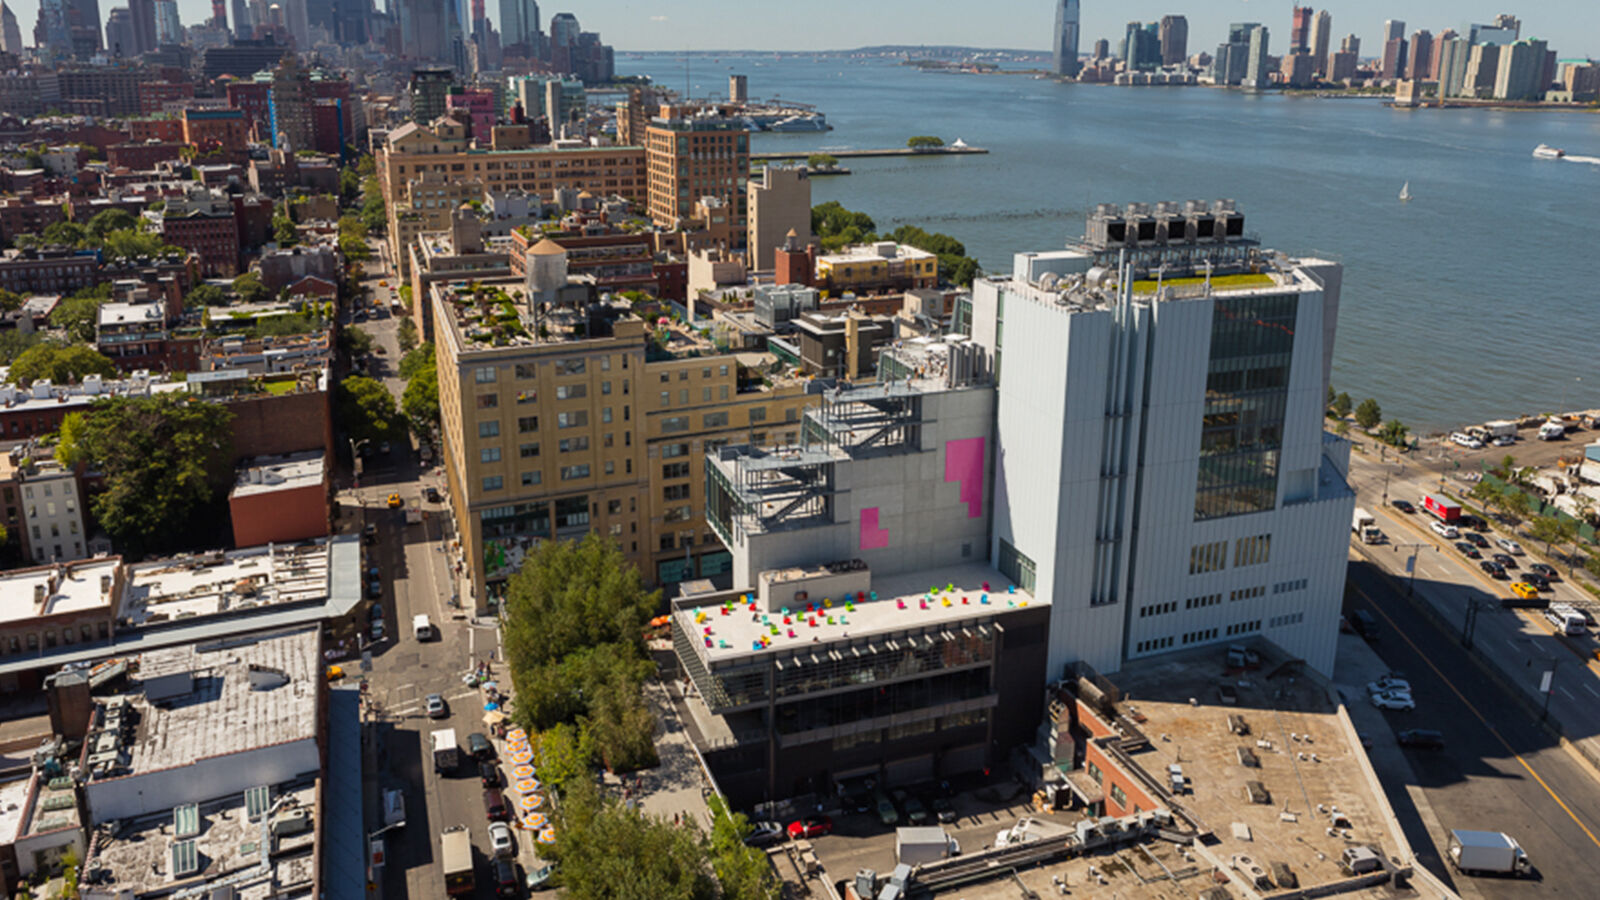 MK02_A view of the Whitney Museum. Photography by Ronald Amstutz.